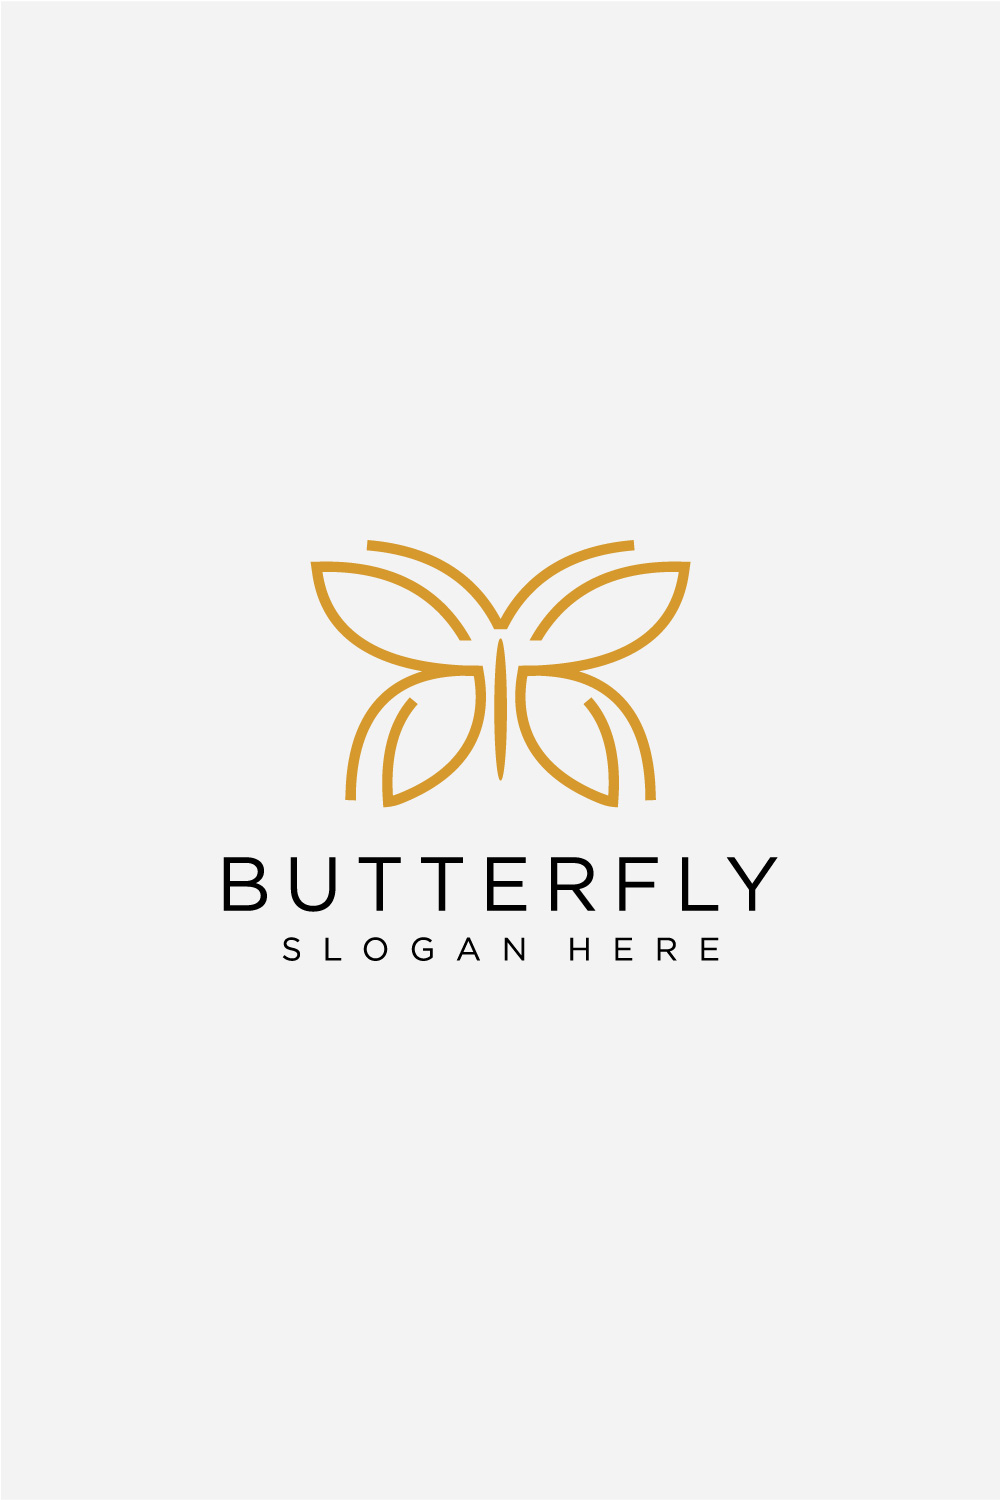 butterfly animal logo design vector pinterest preview image.